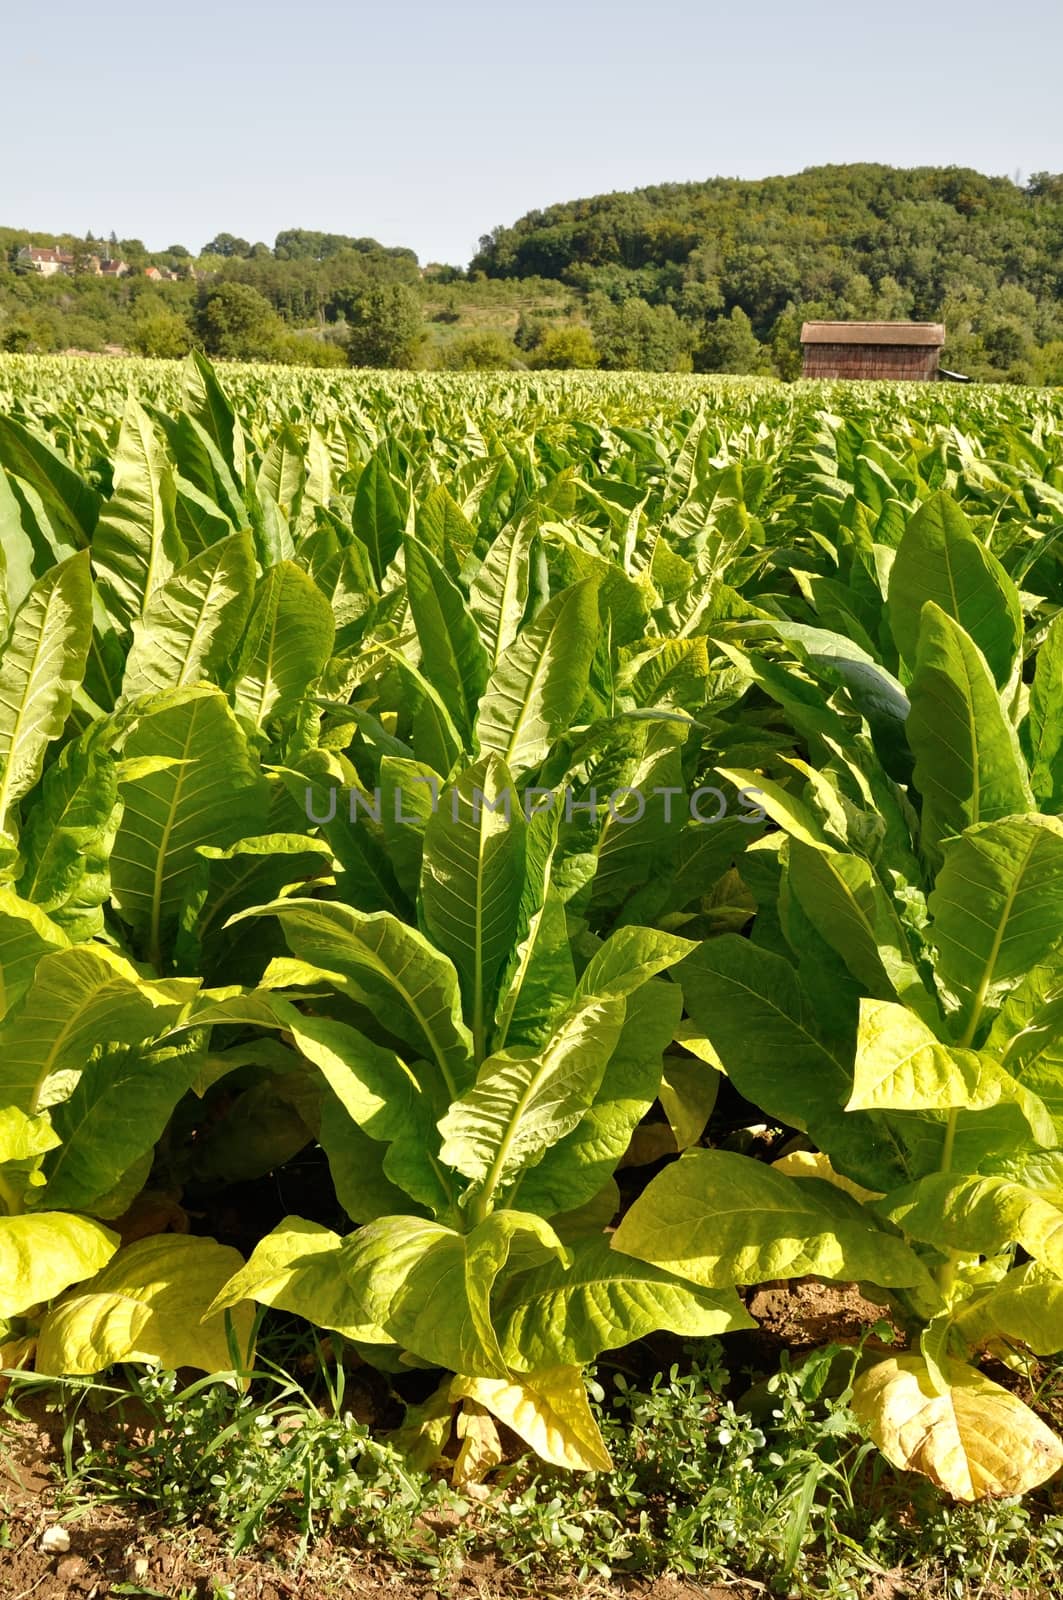 Rows of tobacco plants  by BZH22